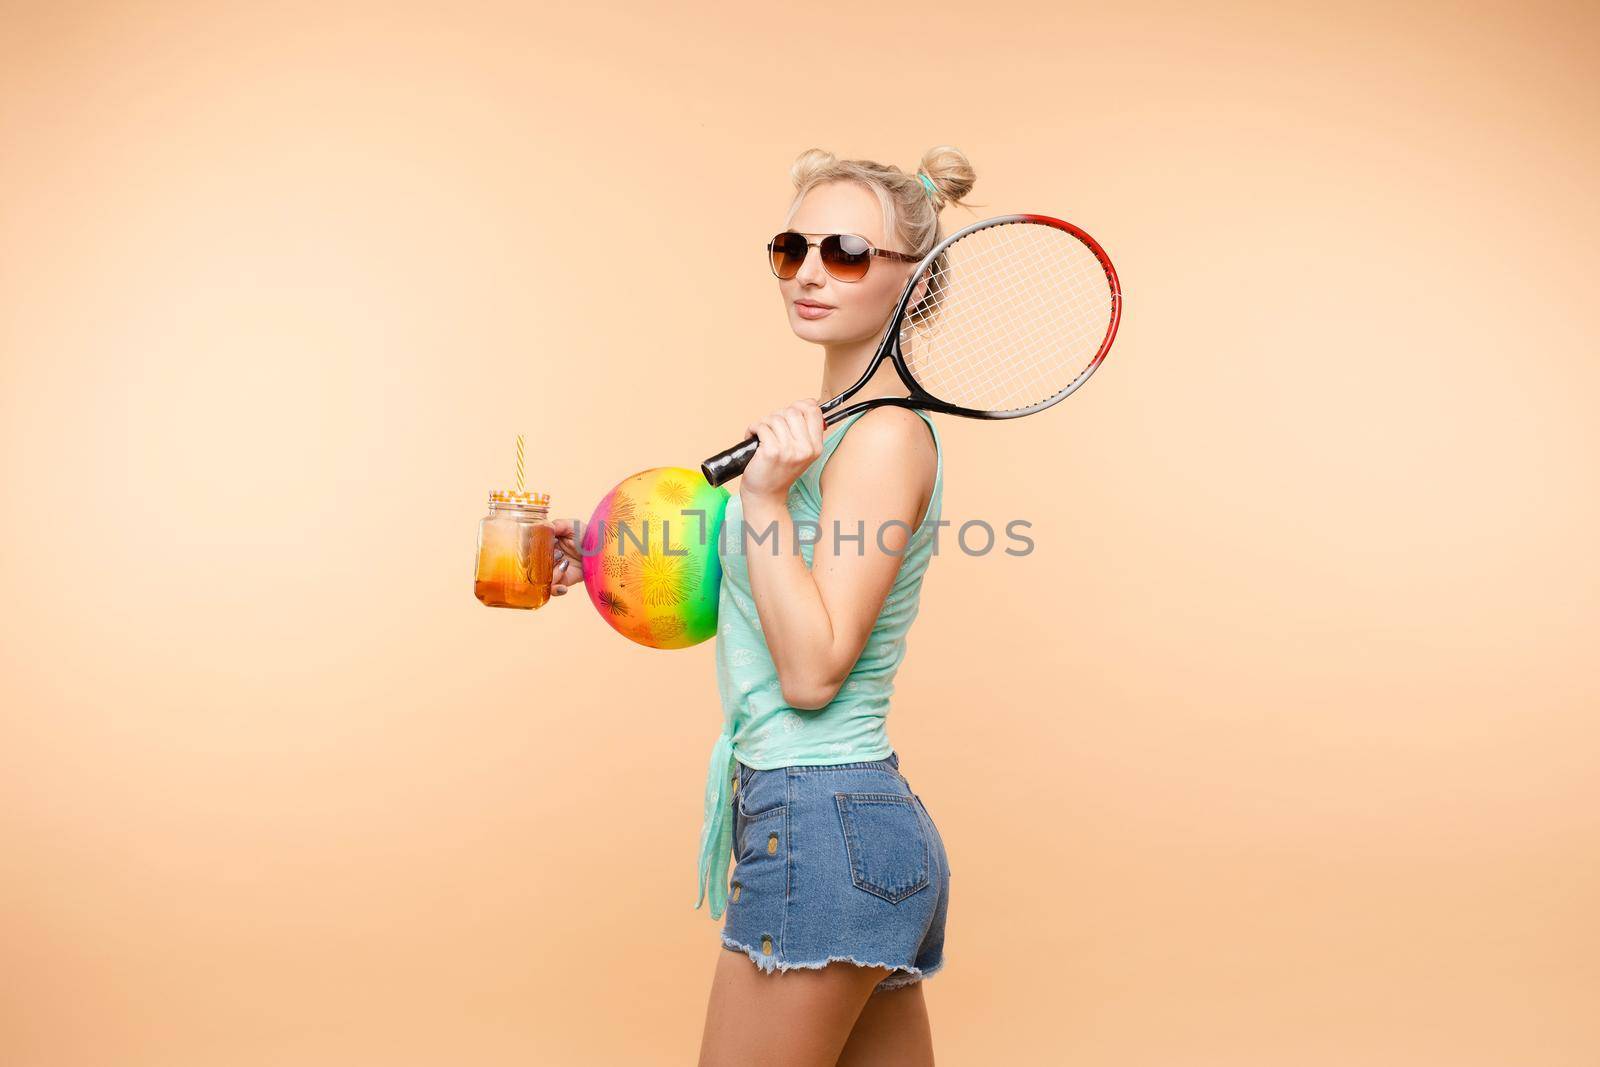 Side view of sporty blonde drinking fresh juice, doing sport and posing in studio. Young model keeping ball and racket and smiling on isolated background. Concept of energy and power.